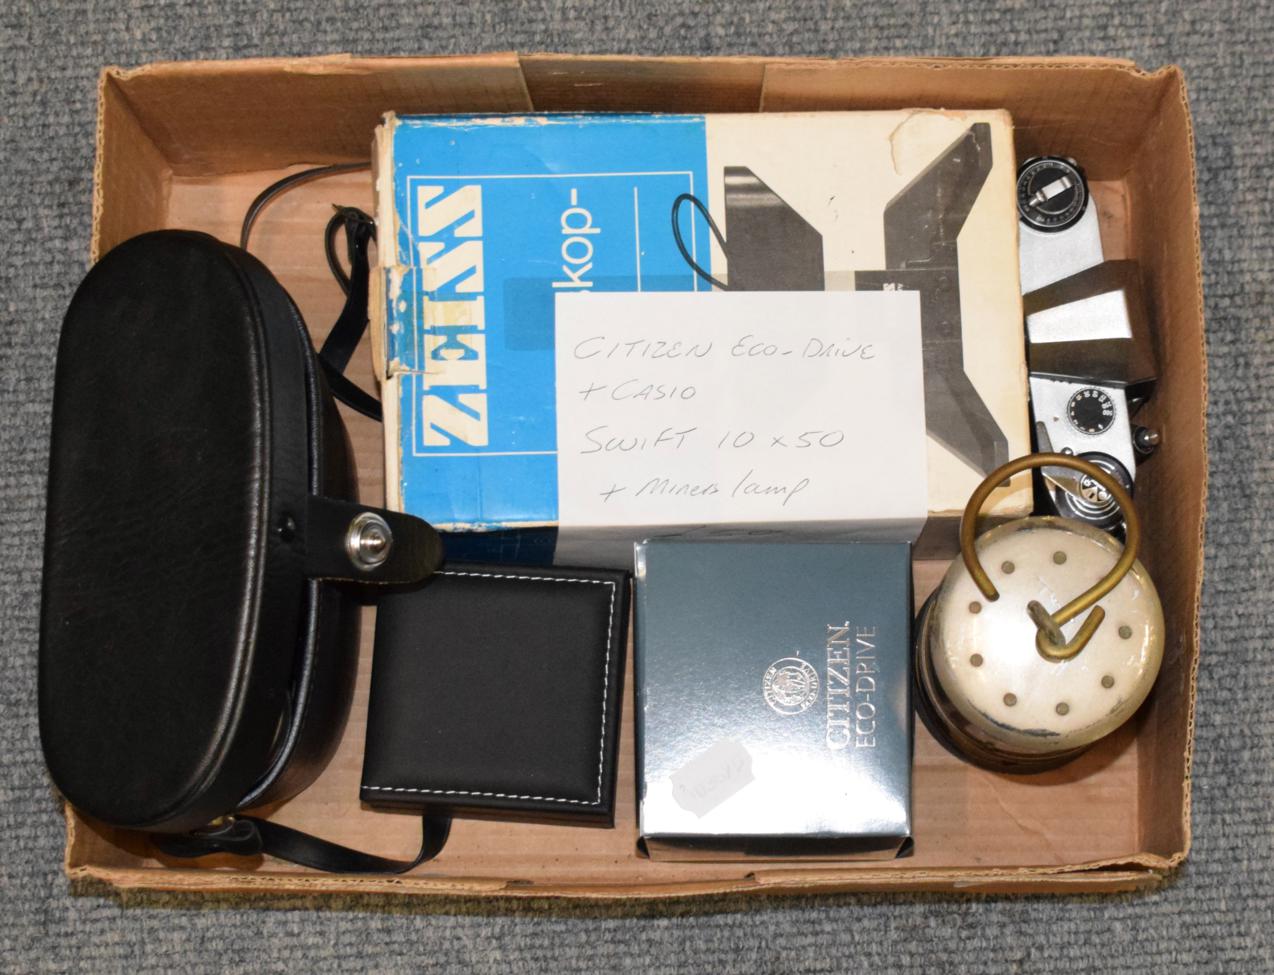 Lot 307 - Assorted cameras and photographic accessories including Citizen Eco-drive, Casio, Swift 10 x 50...